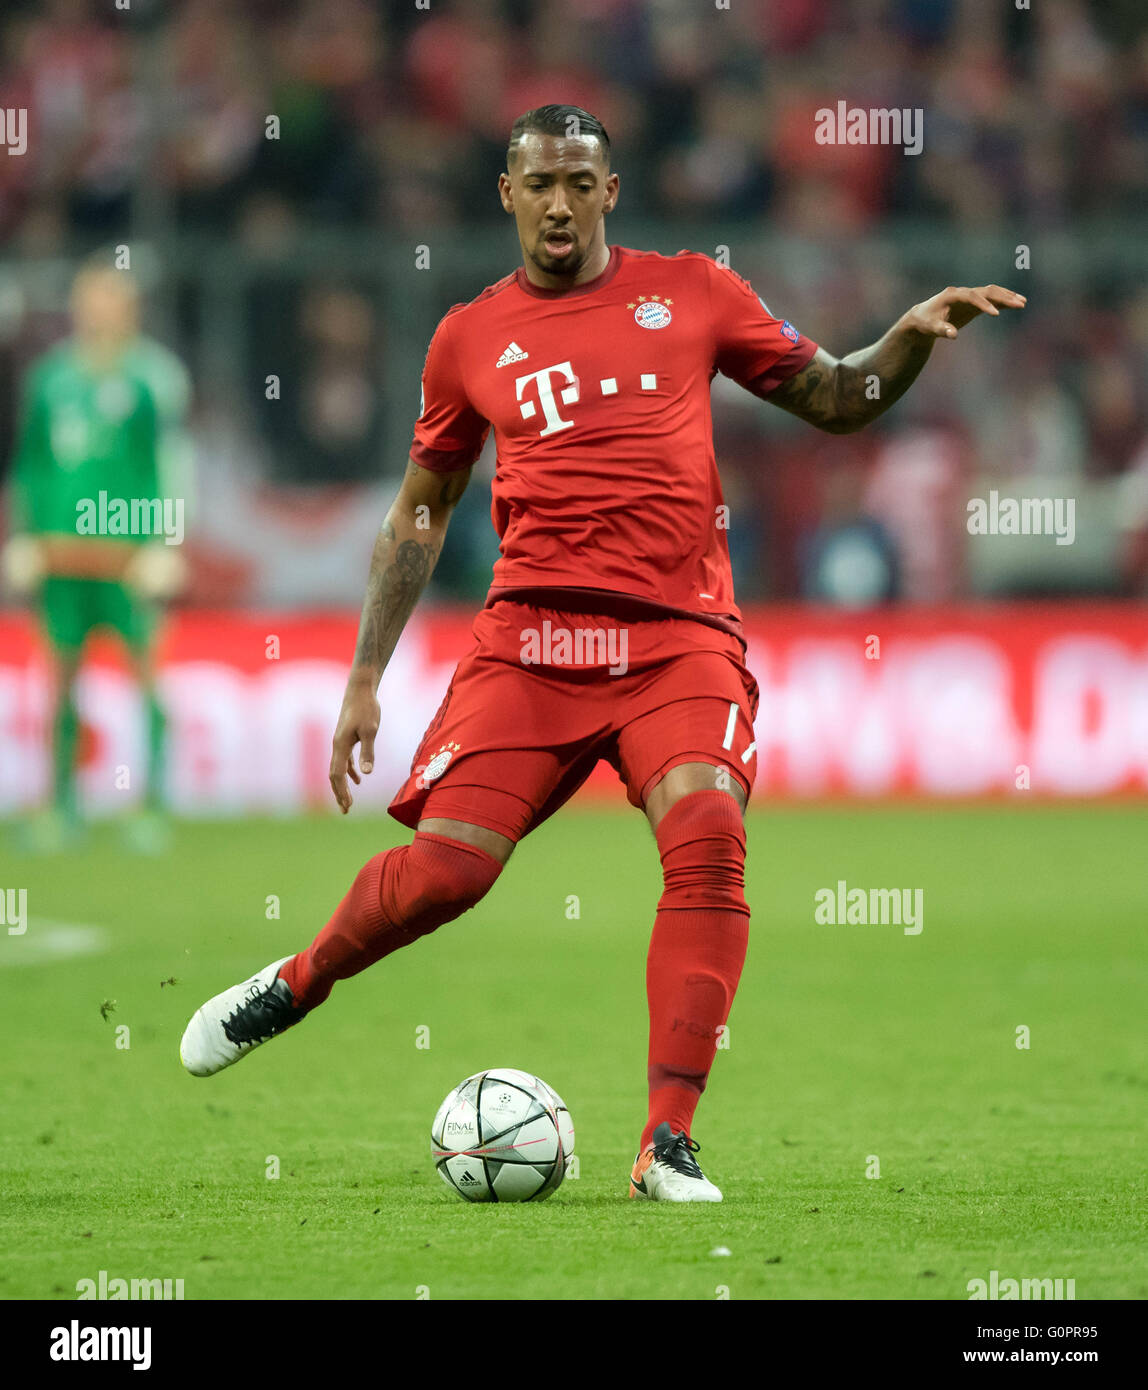 Bayern Munich S Jerome Boateng In Action During The Uefa Champions League Semi Final Soccer